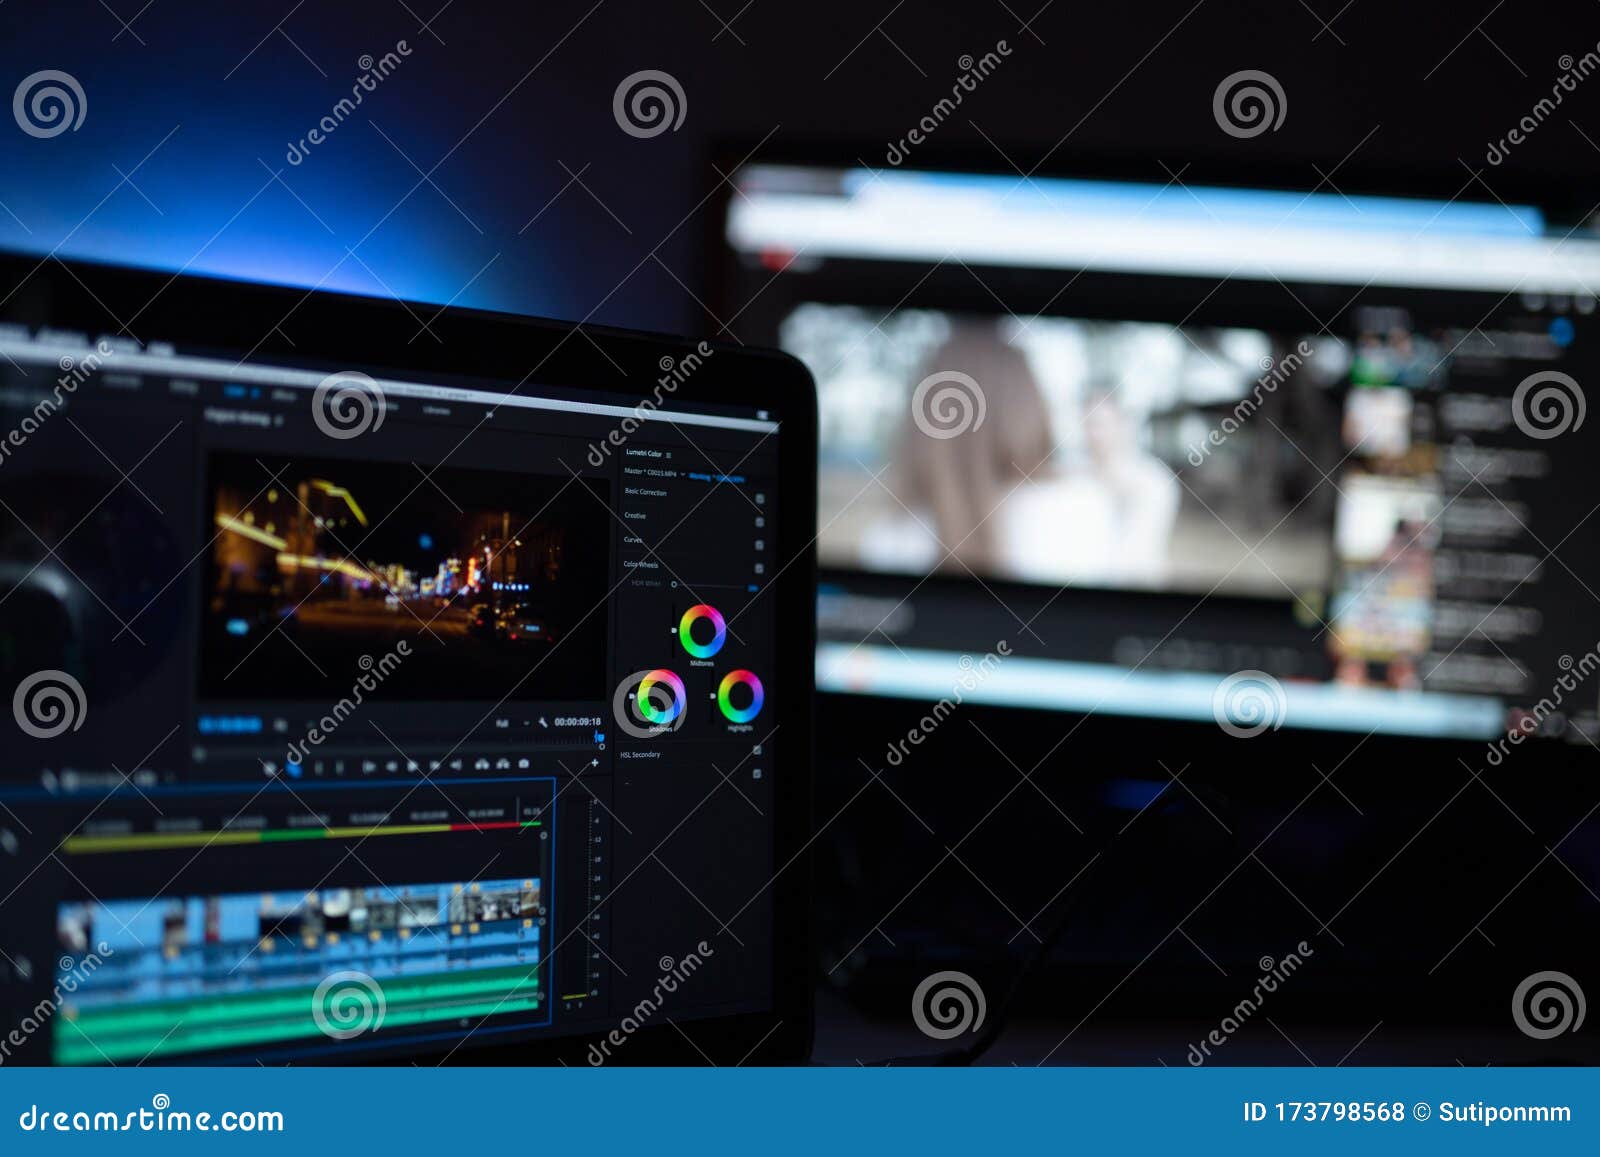 editor display video editing color grading to upload content on social media or worldwide